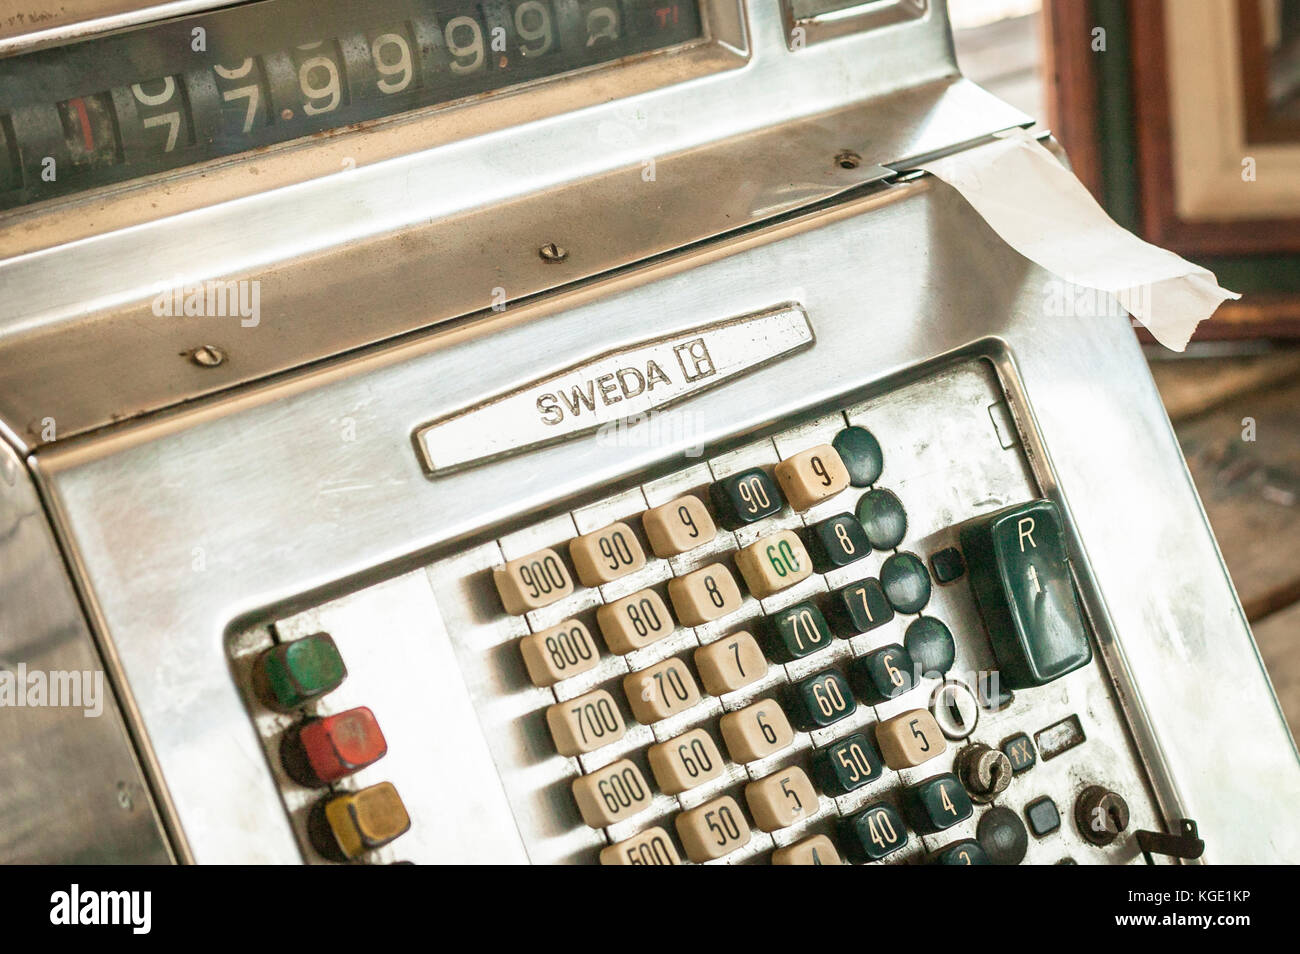 An old cash register machine Stock Photo